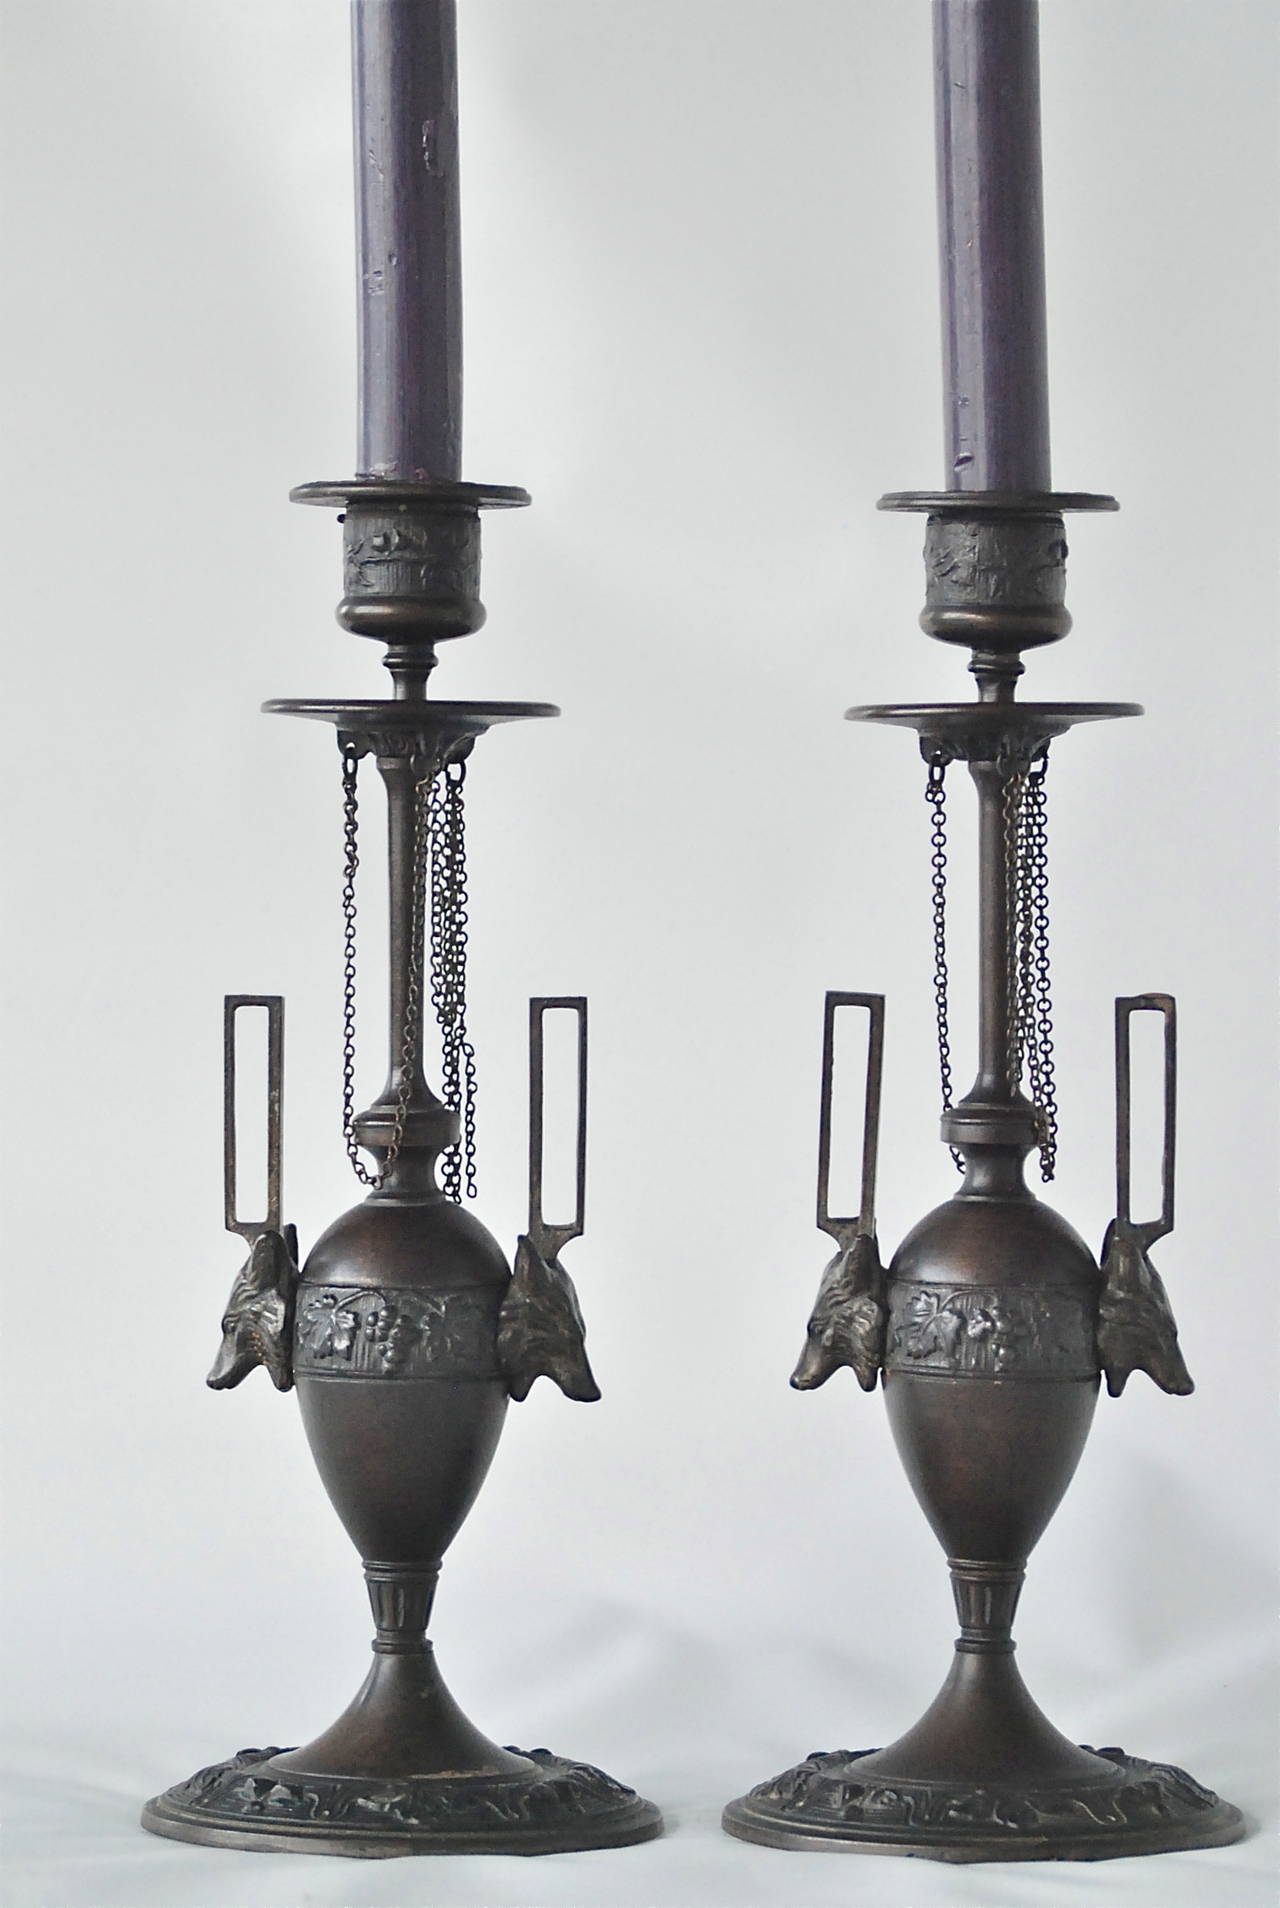 Swedish Pair of Candleholders by F. L. Vombach